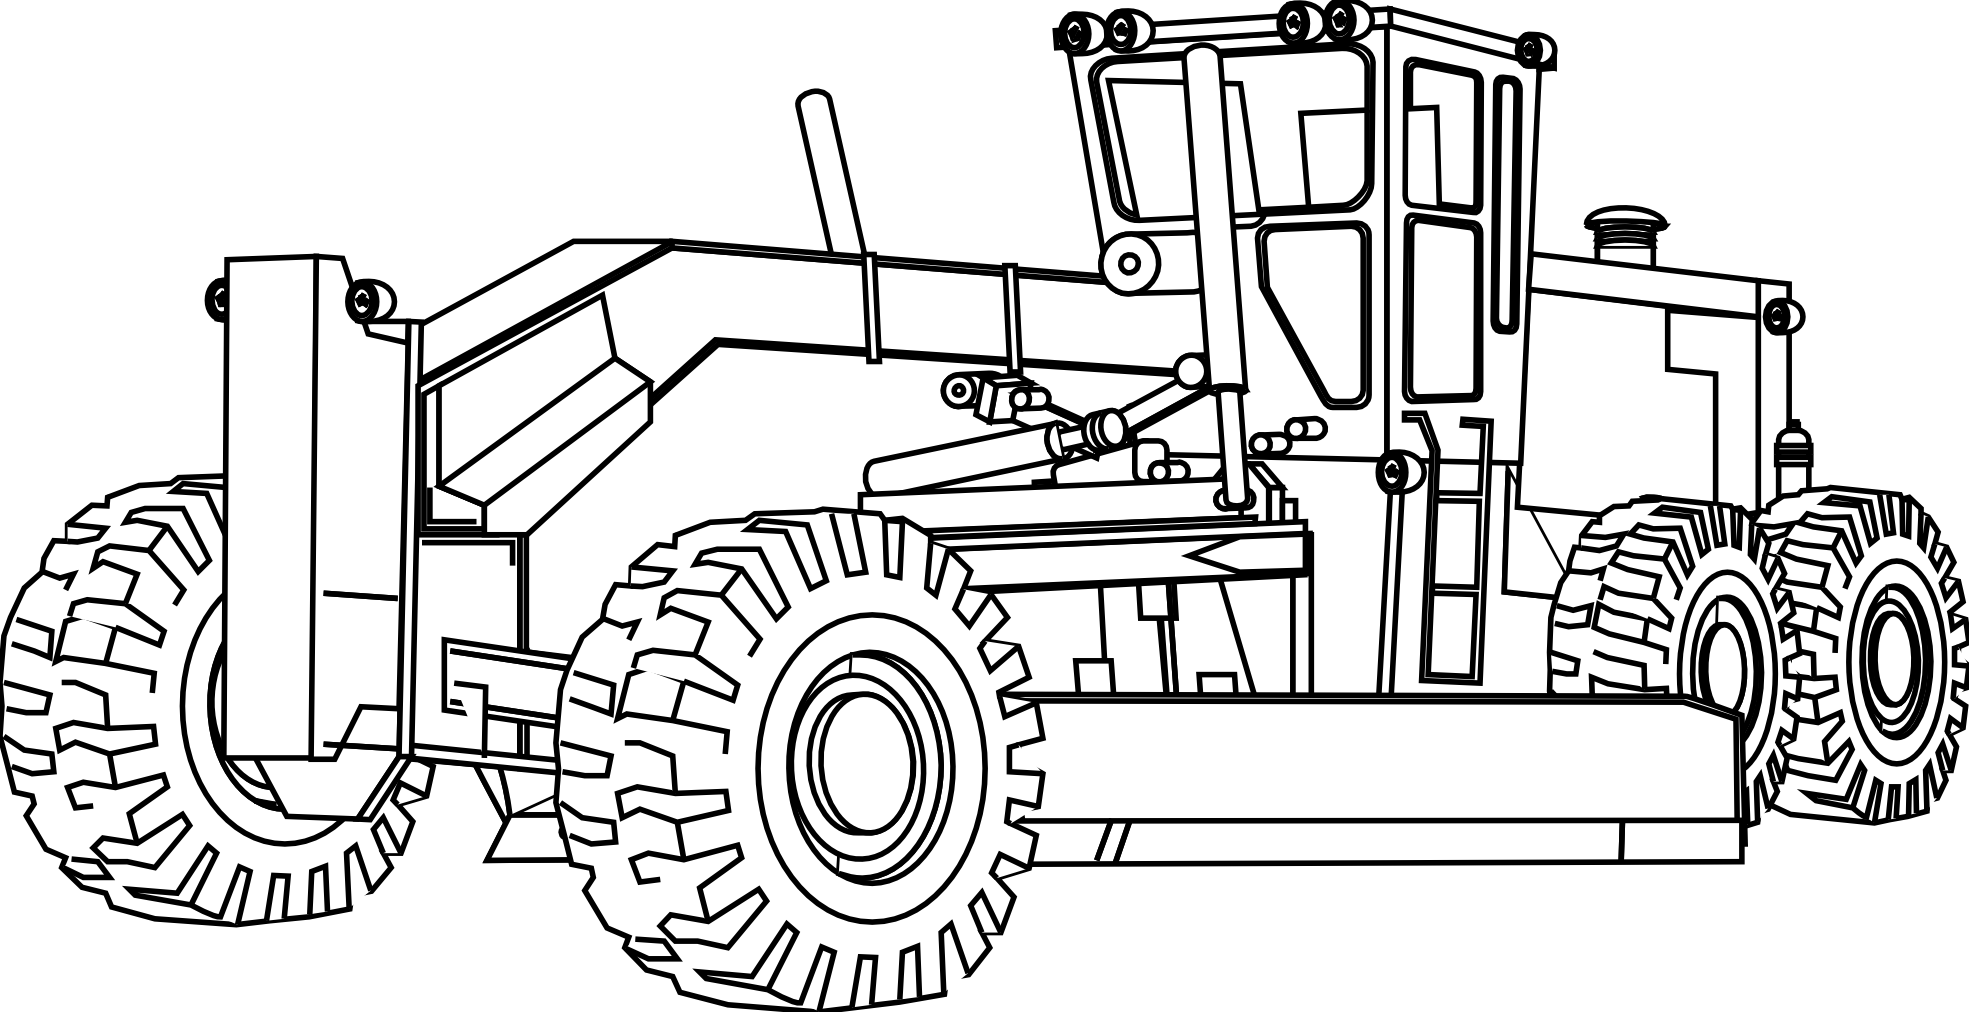 Construction Coloring Pages Free Printables - Coloring Home